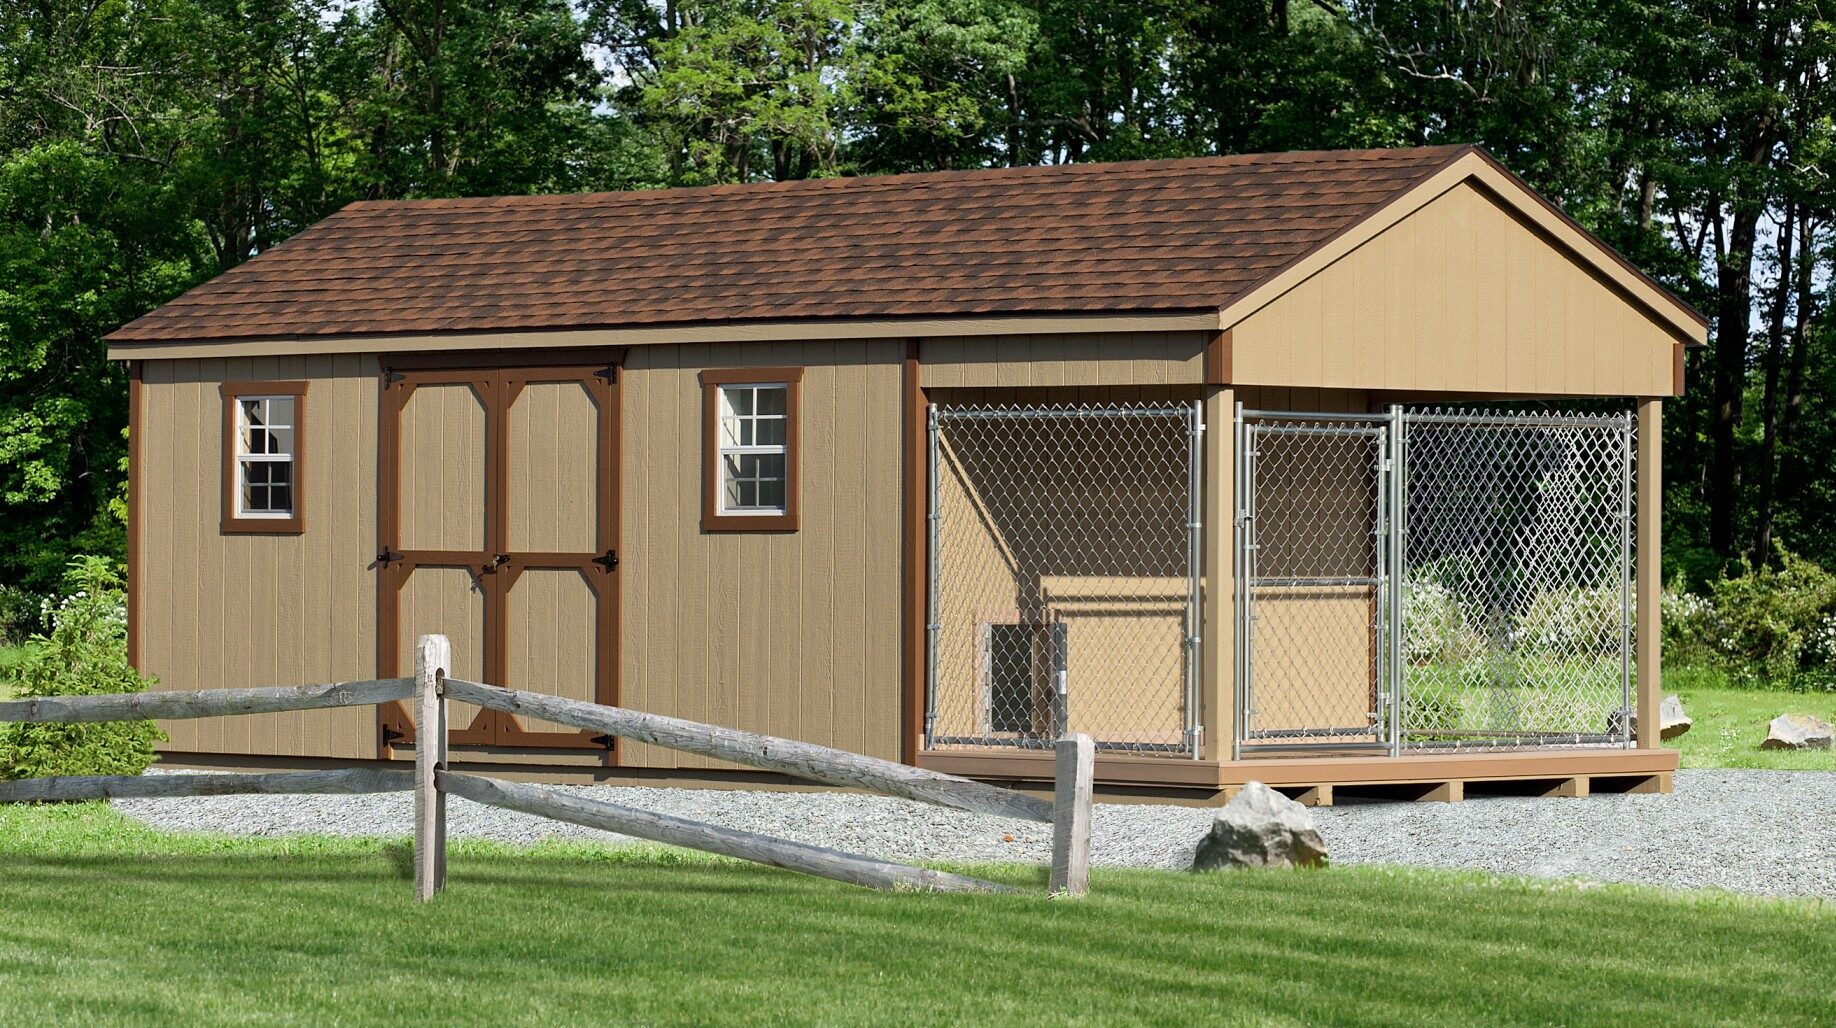 Front and side view of a standard 10x24 single capacity kennel and shed combo